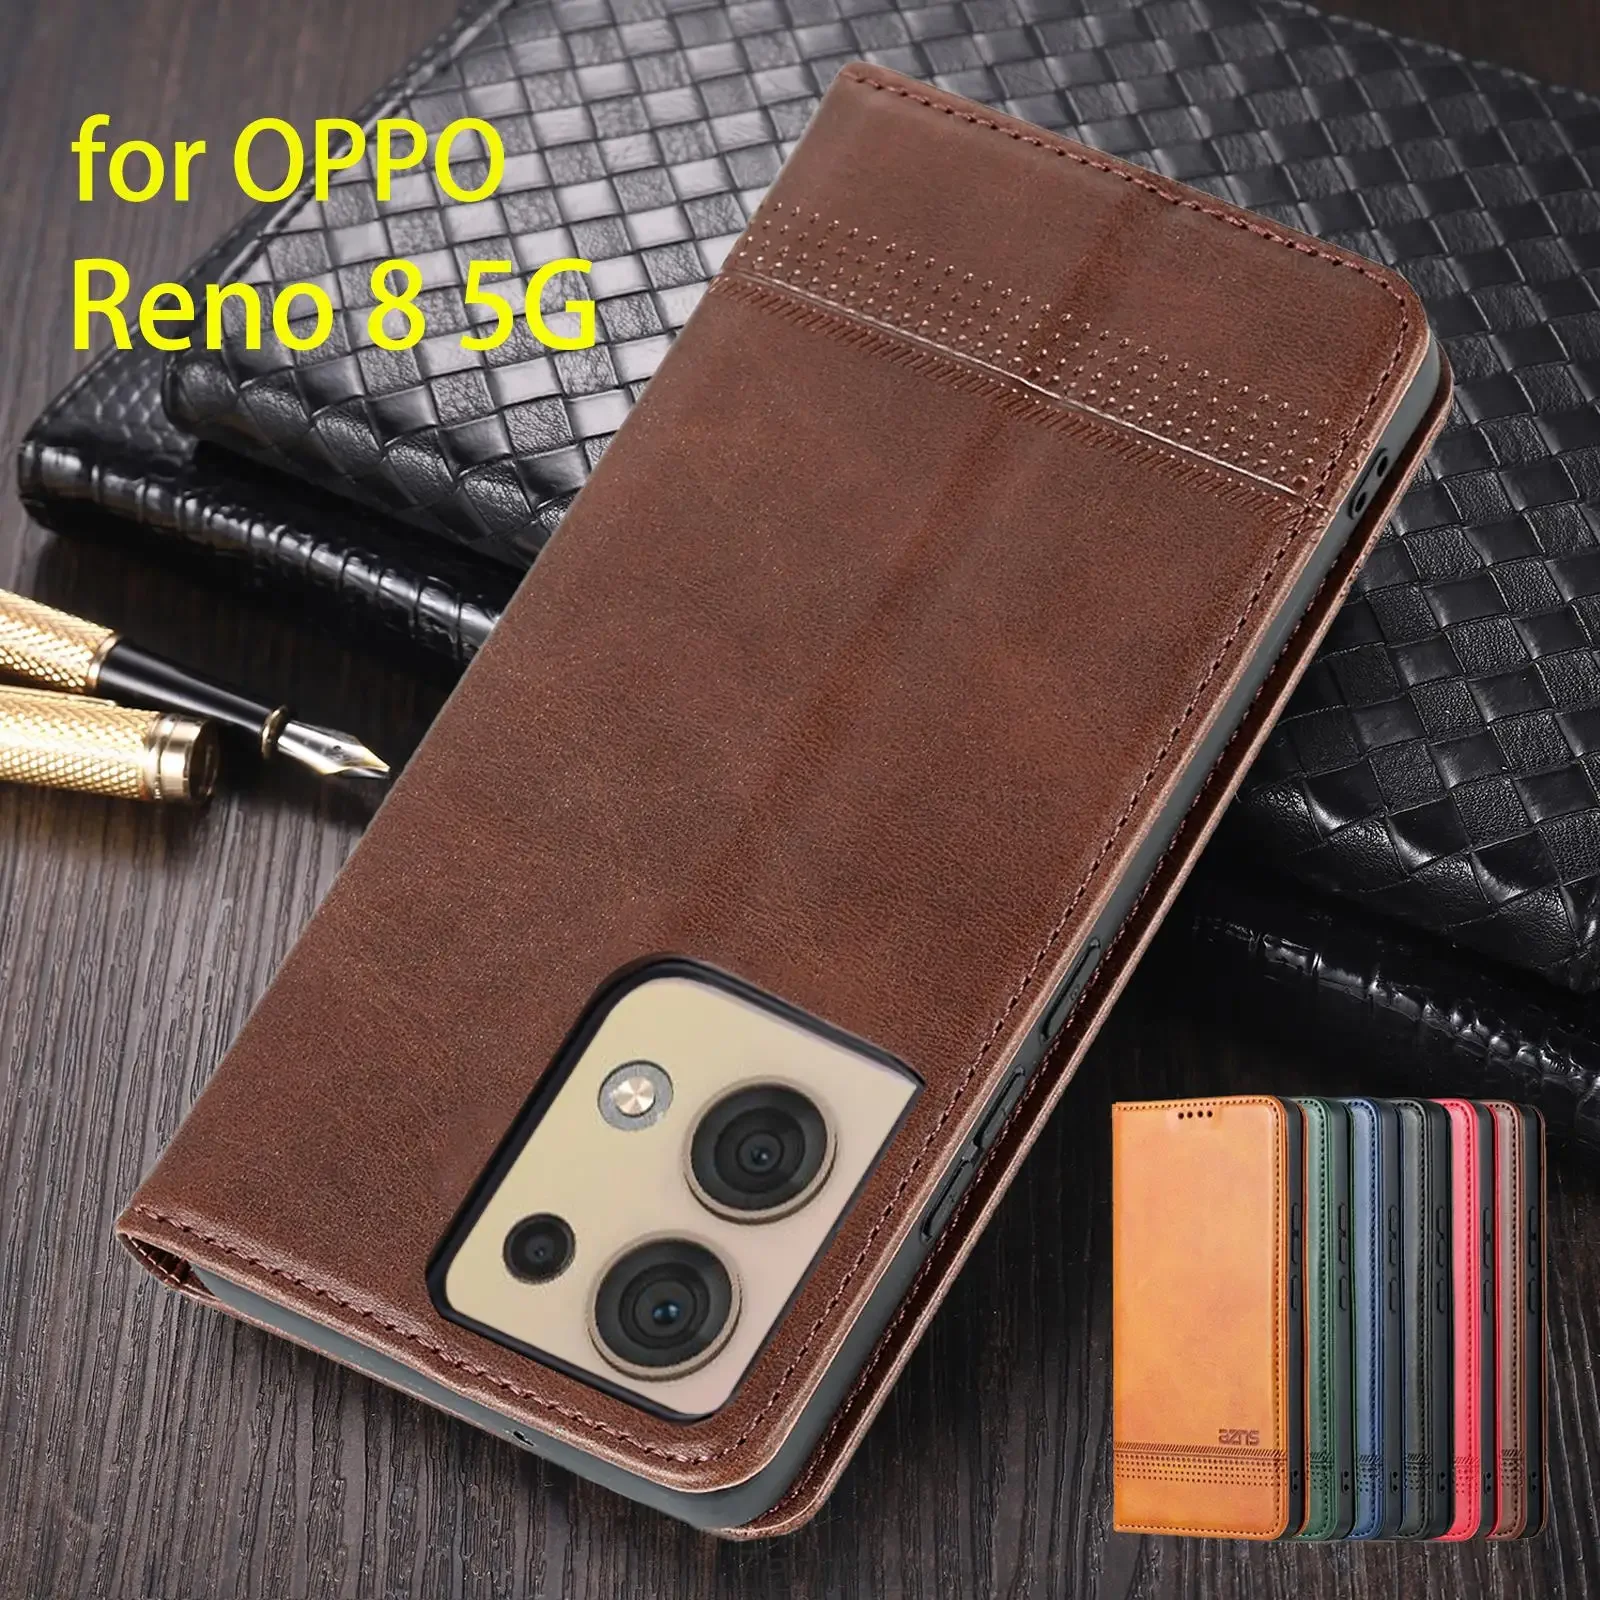 

Deluxe Magnetic Adsorption Leather Fitted Case for OPPO Reno 8 5G / Reno8 5G 6.4" Flip Cover Protective Case Capa Fundas Coque